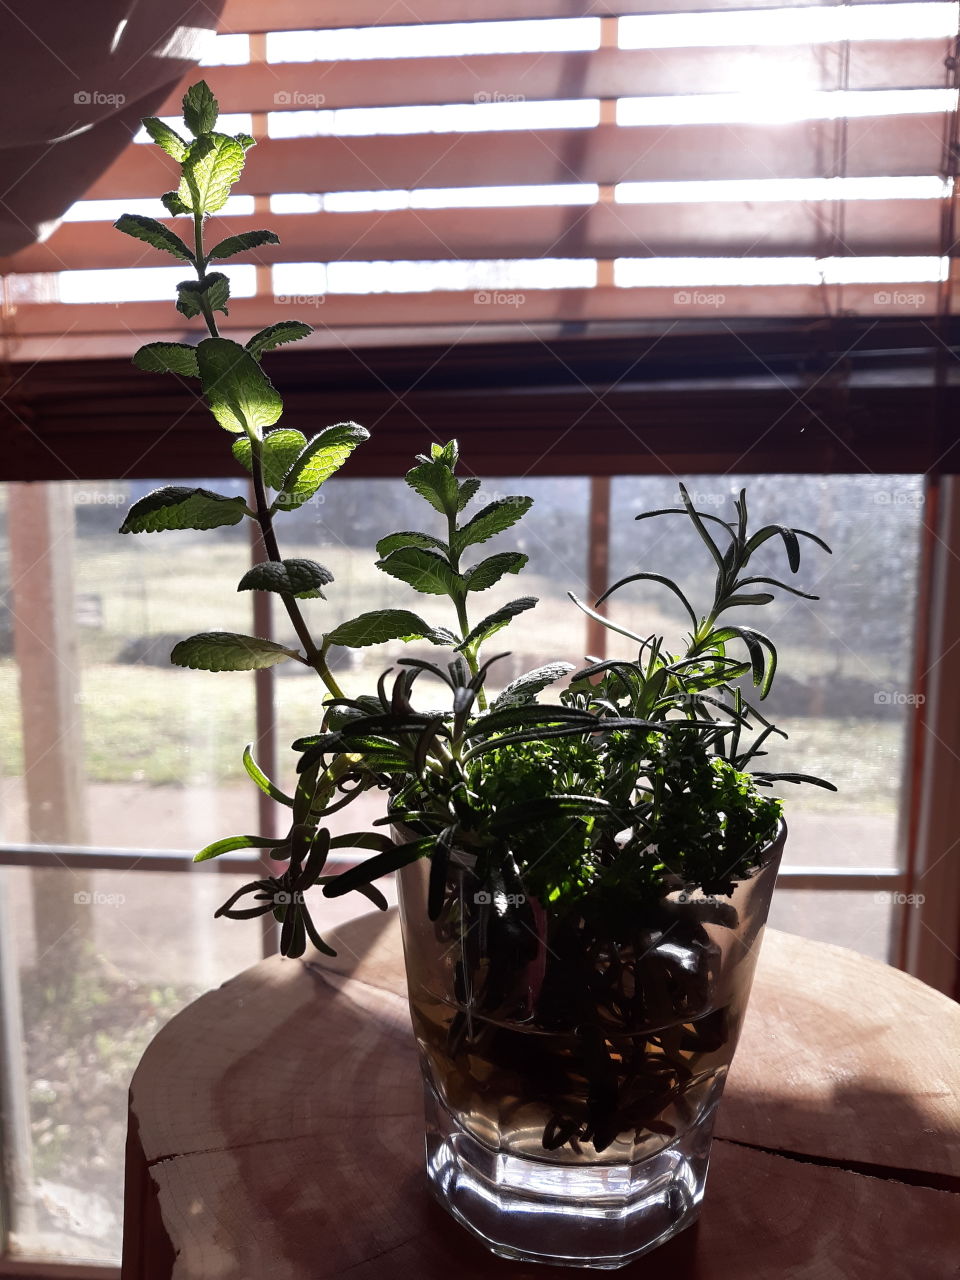 Herbs Making Roots in Glass of Water in the Window